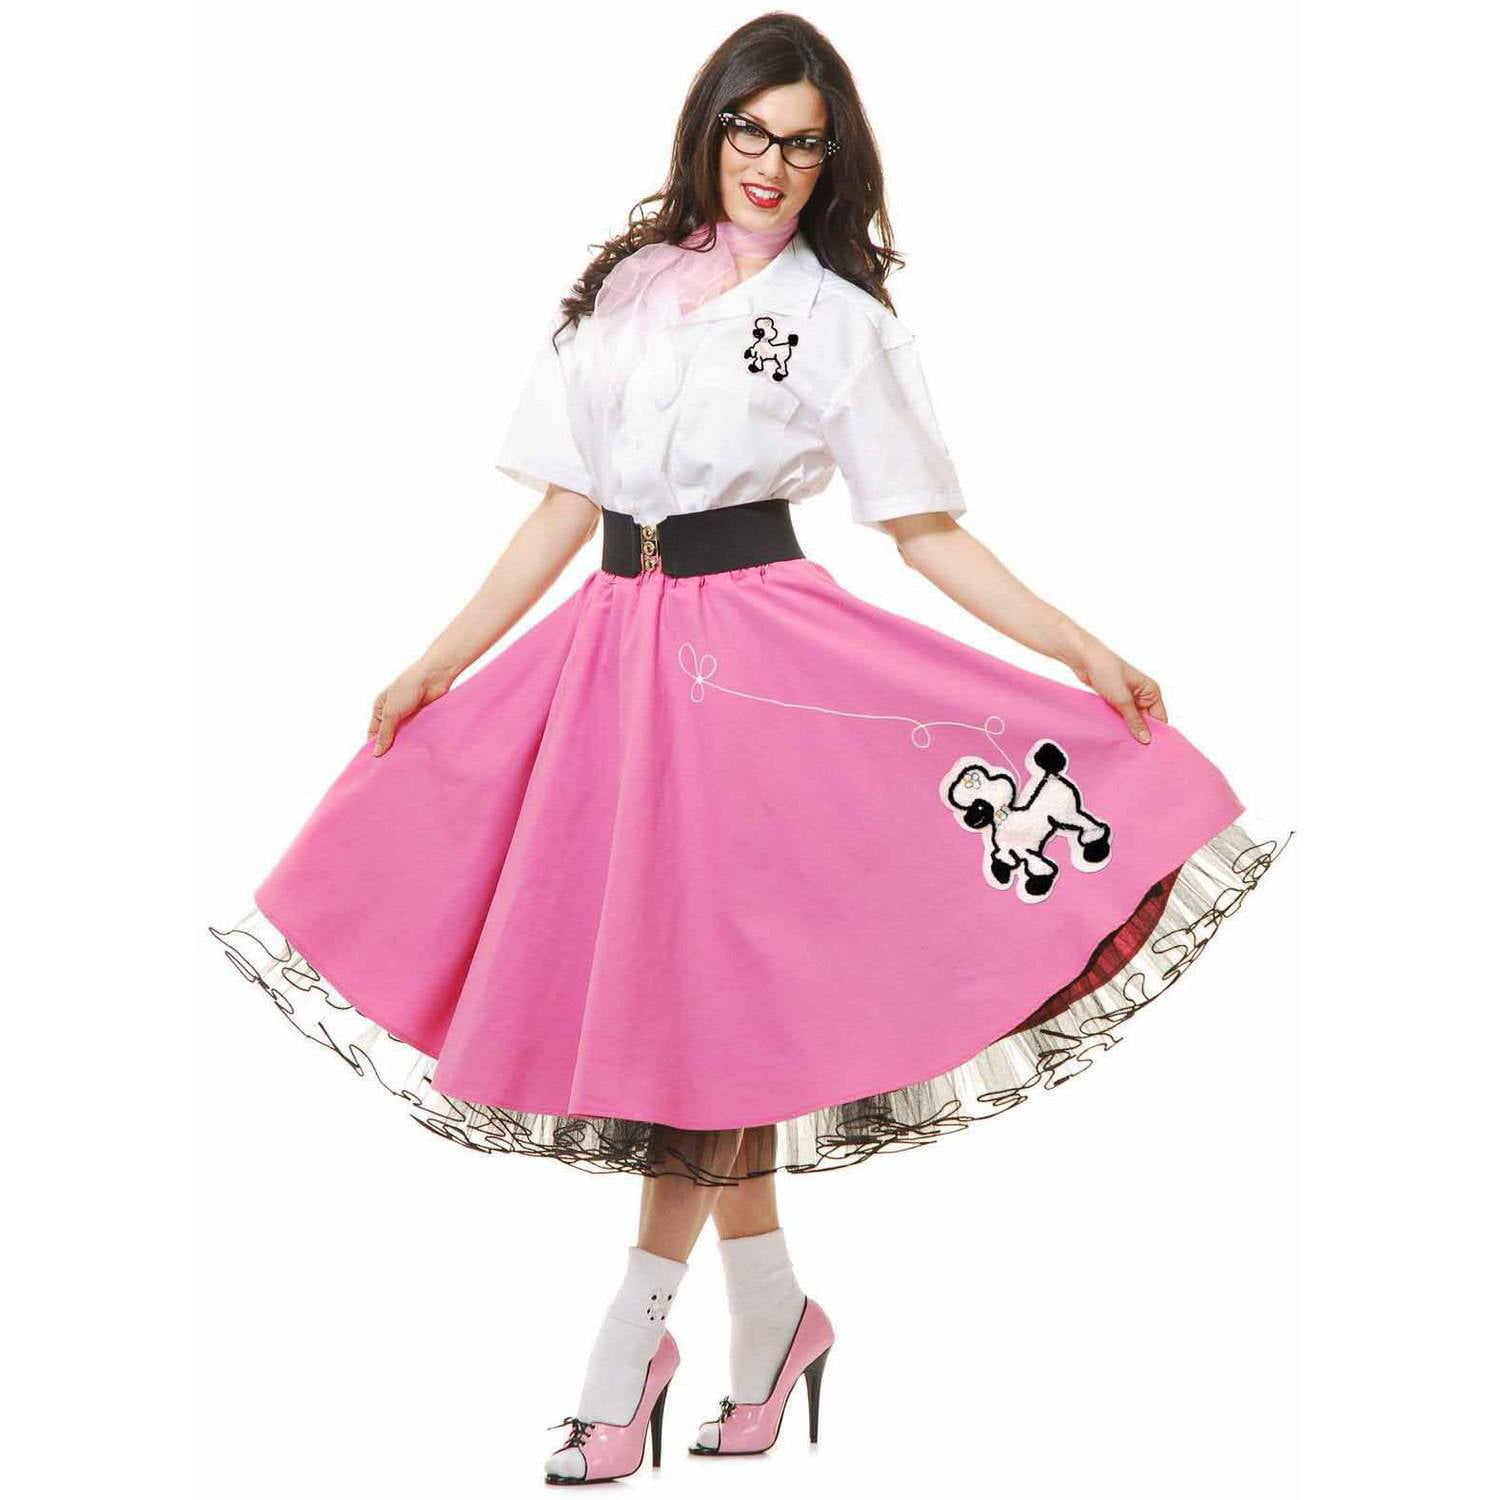 Complete 50's Poodle Outfit Pink Women's Adult Halloween Costume ...